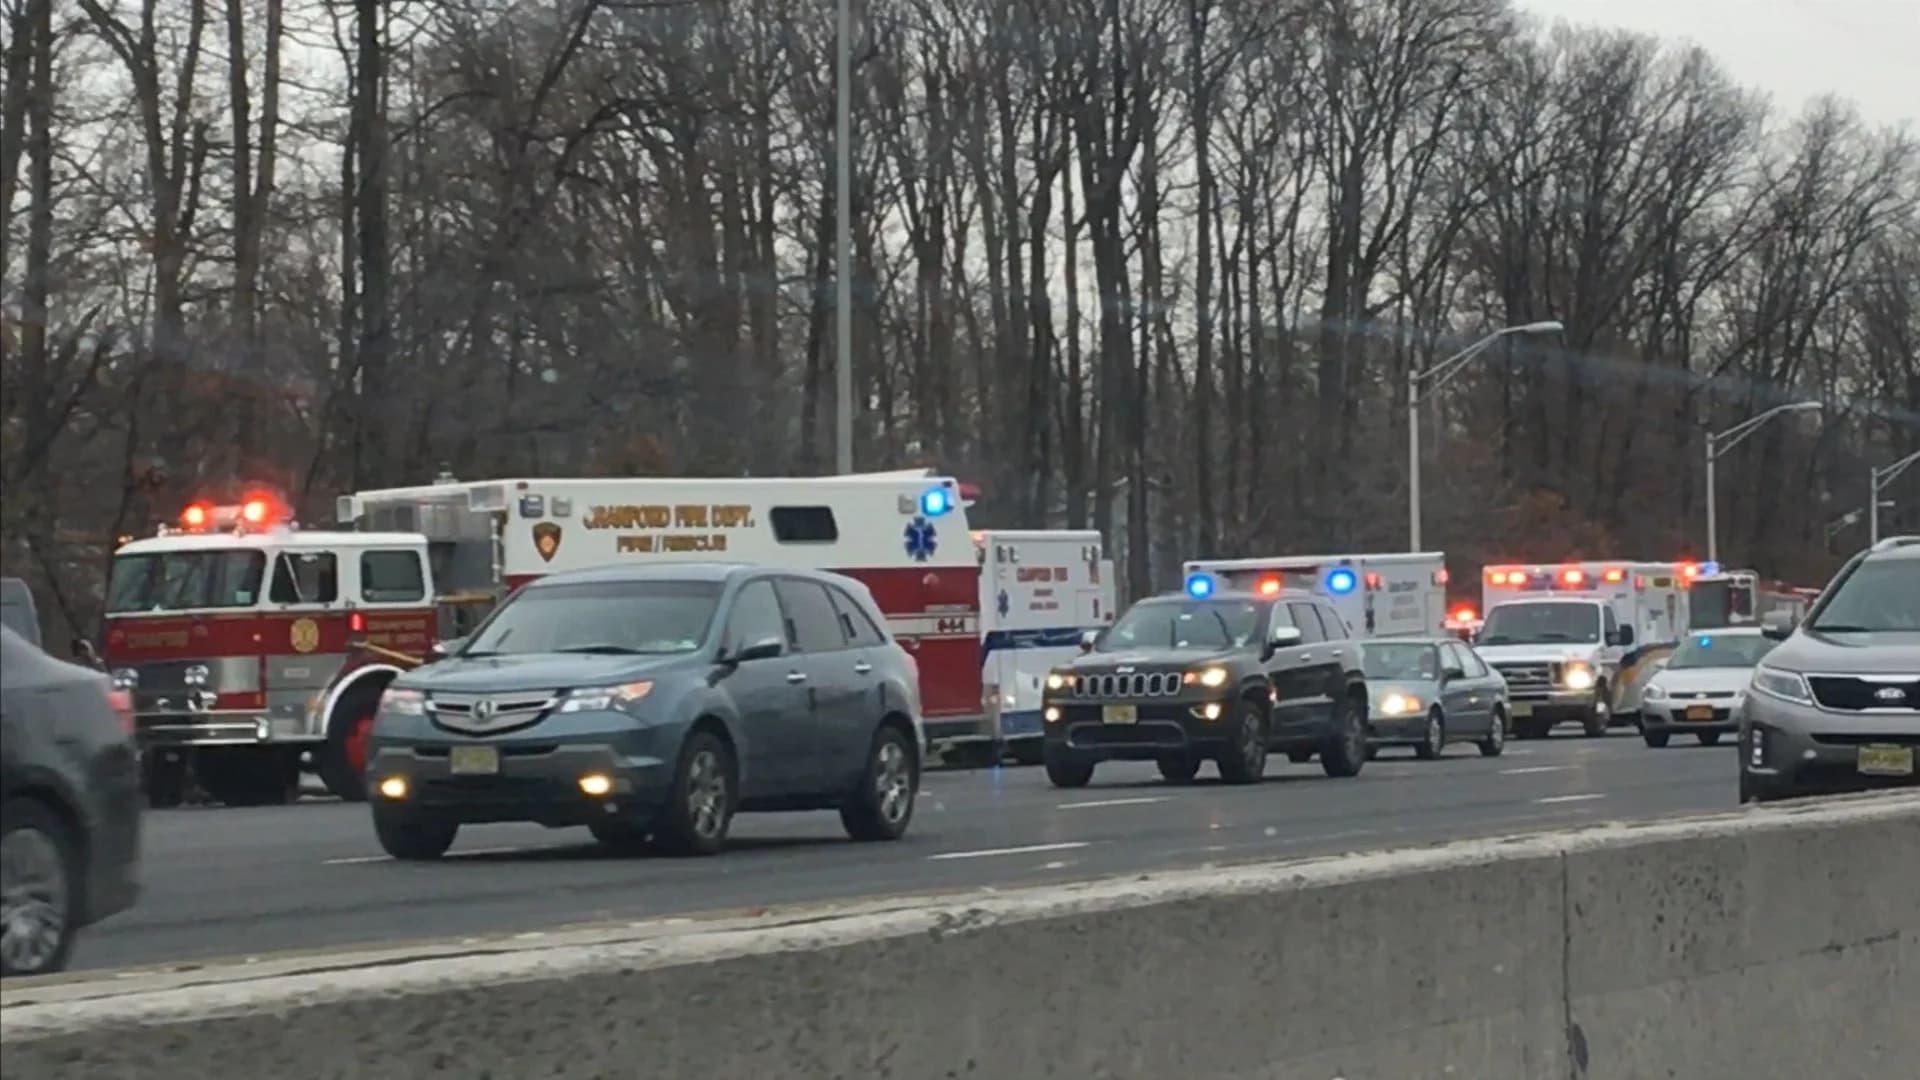 3-vehicle crash on Parkway delays traffic for miles